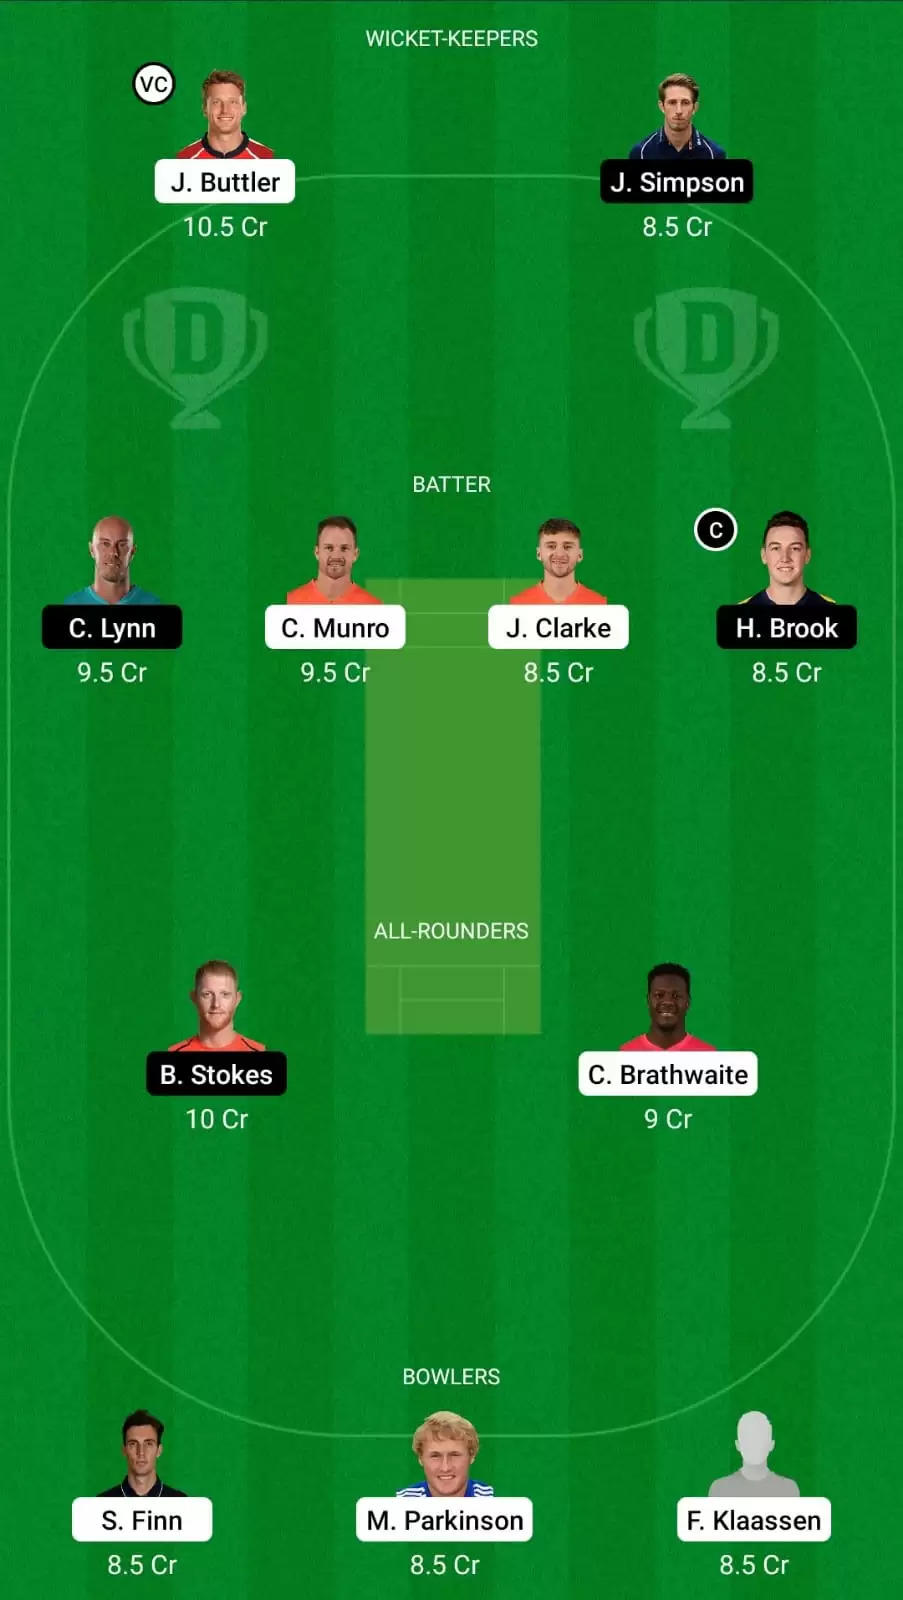 MNR vs NOS Dream11 Team Prediction for The Hundred Women’s 2021: Manchester Originals vs Northern Superchargers Best Fantasy Cricket Tips, Strongest Playing XI, Pitch Report and Player Updates